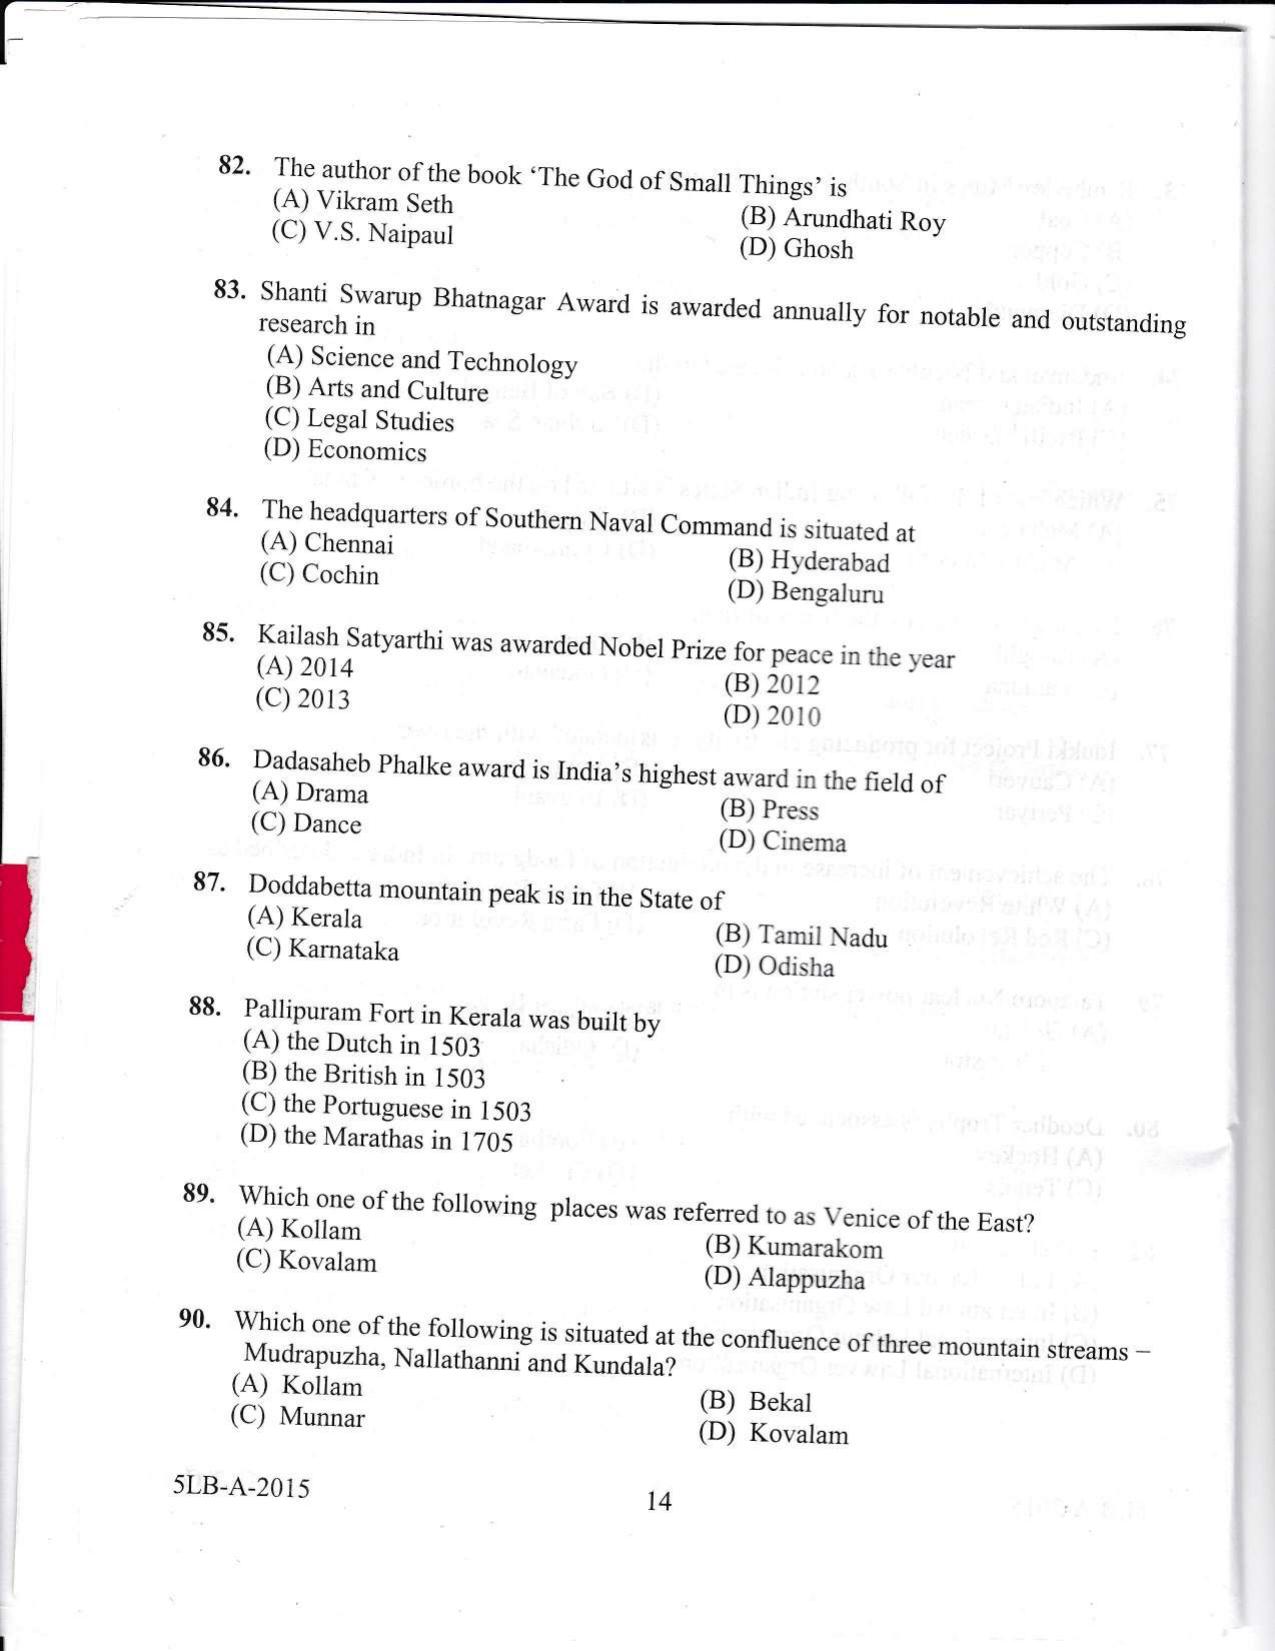 KLEE 5 Year LLB Exam 2015 Question Paper - Page 14